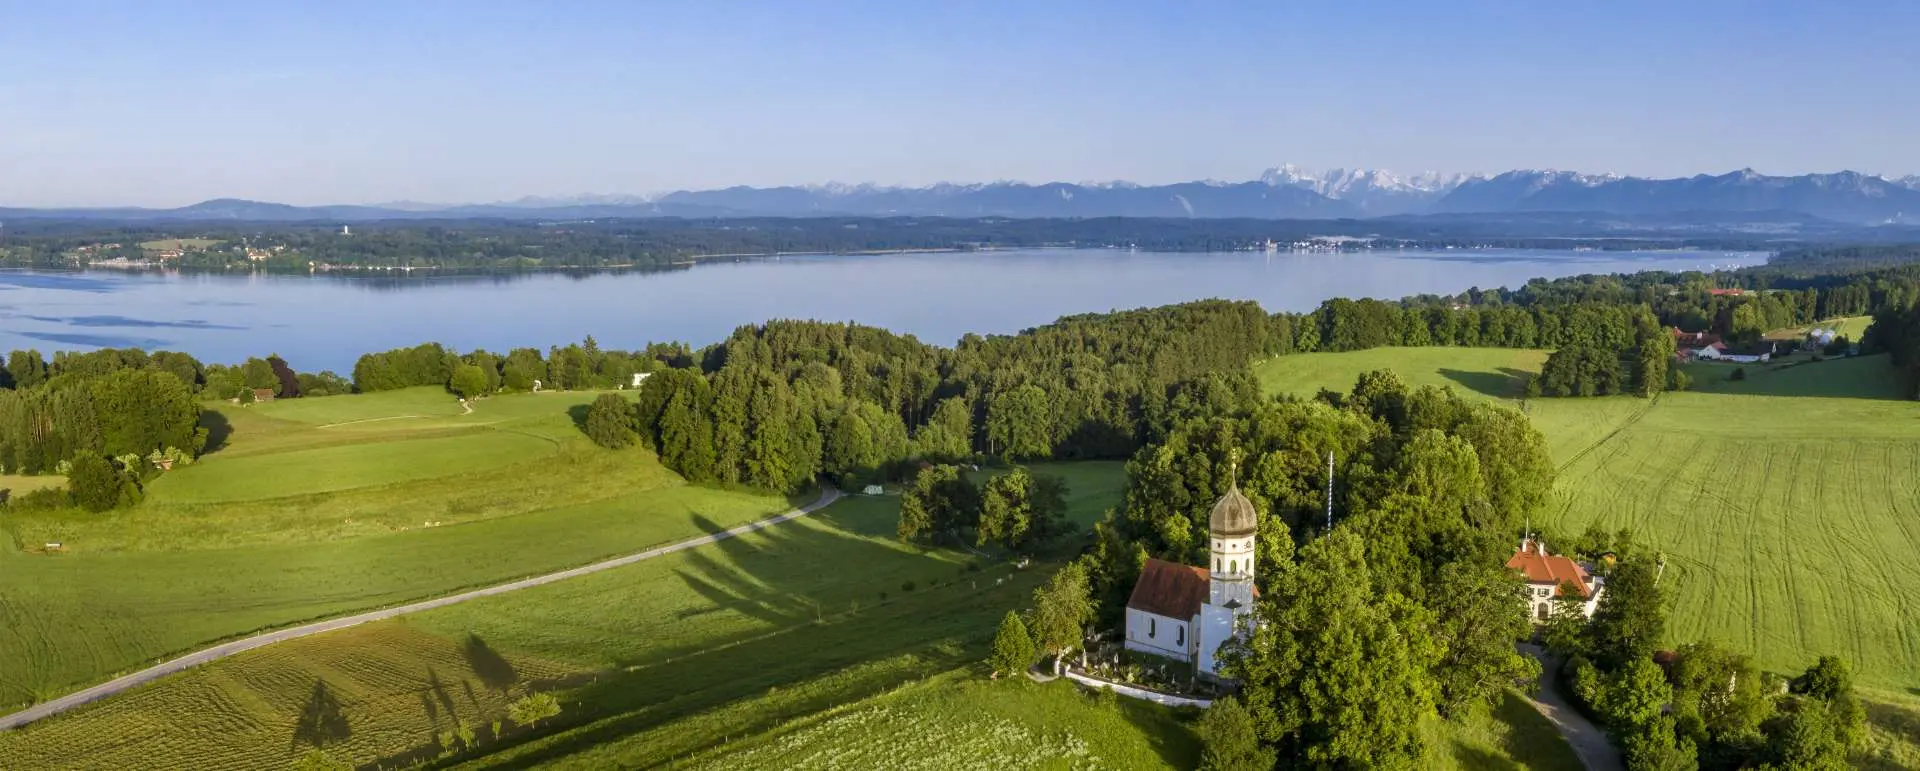 Lake Starnberg - Top incentive travel hotels for rewarding experiences